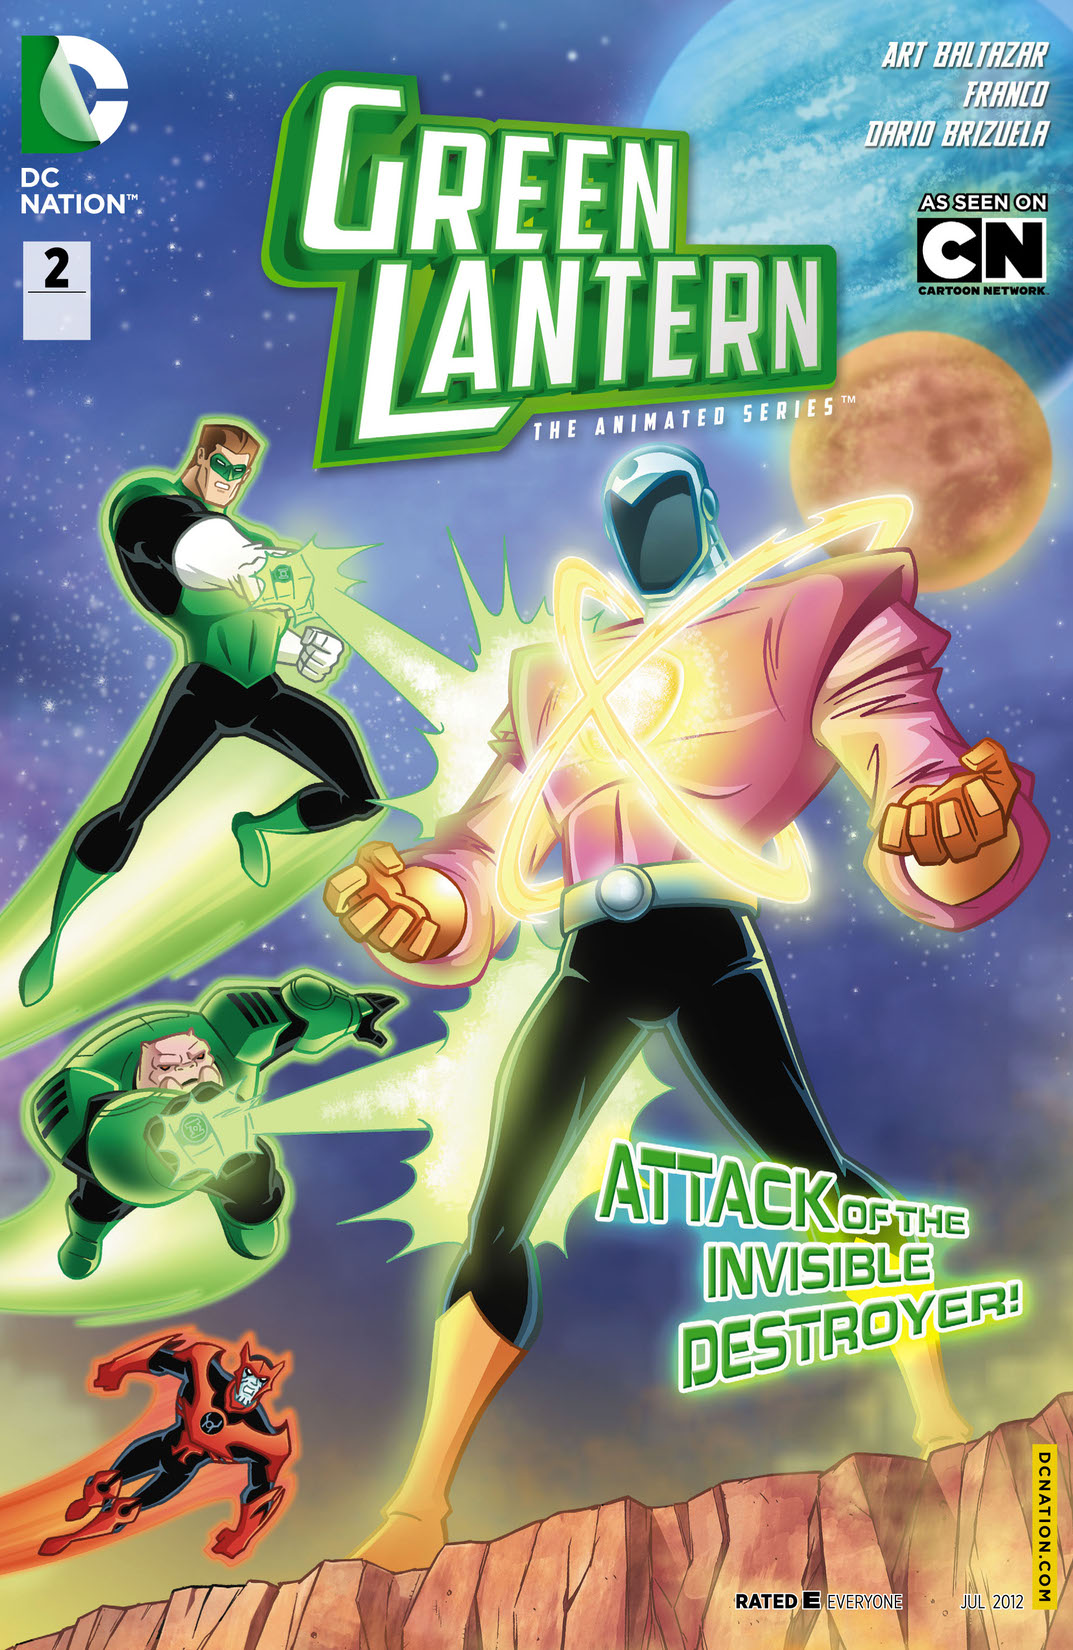 Green Lantern: The Animated Series #2 preview images